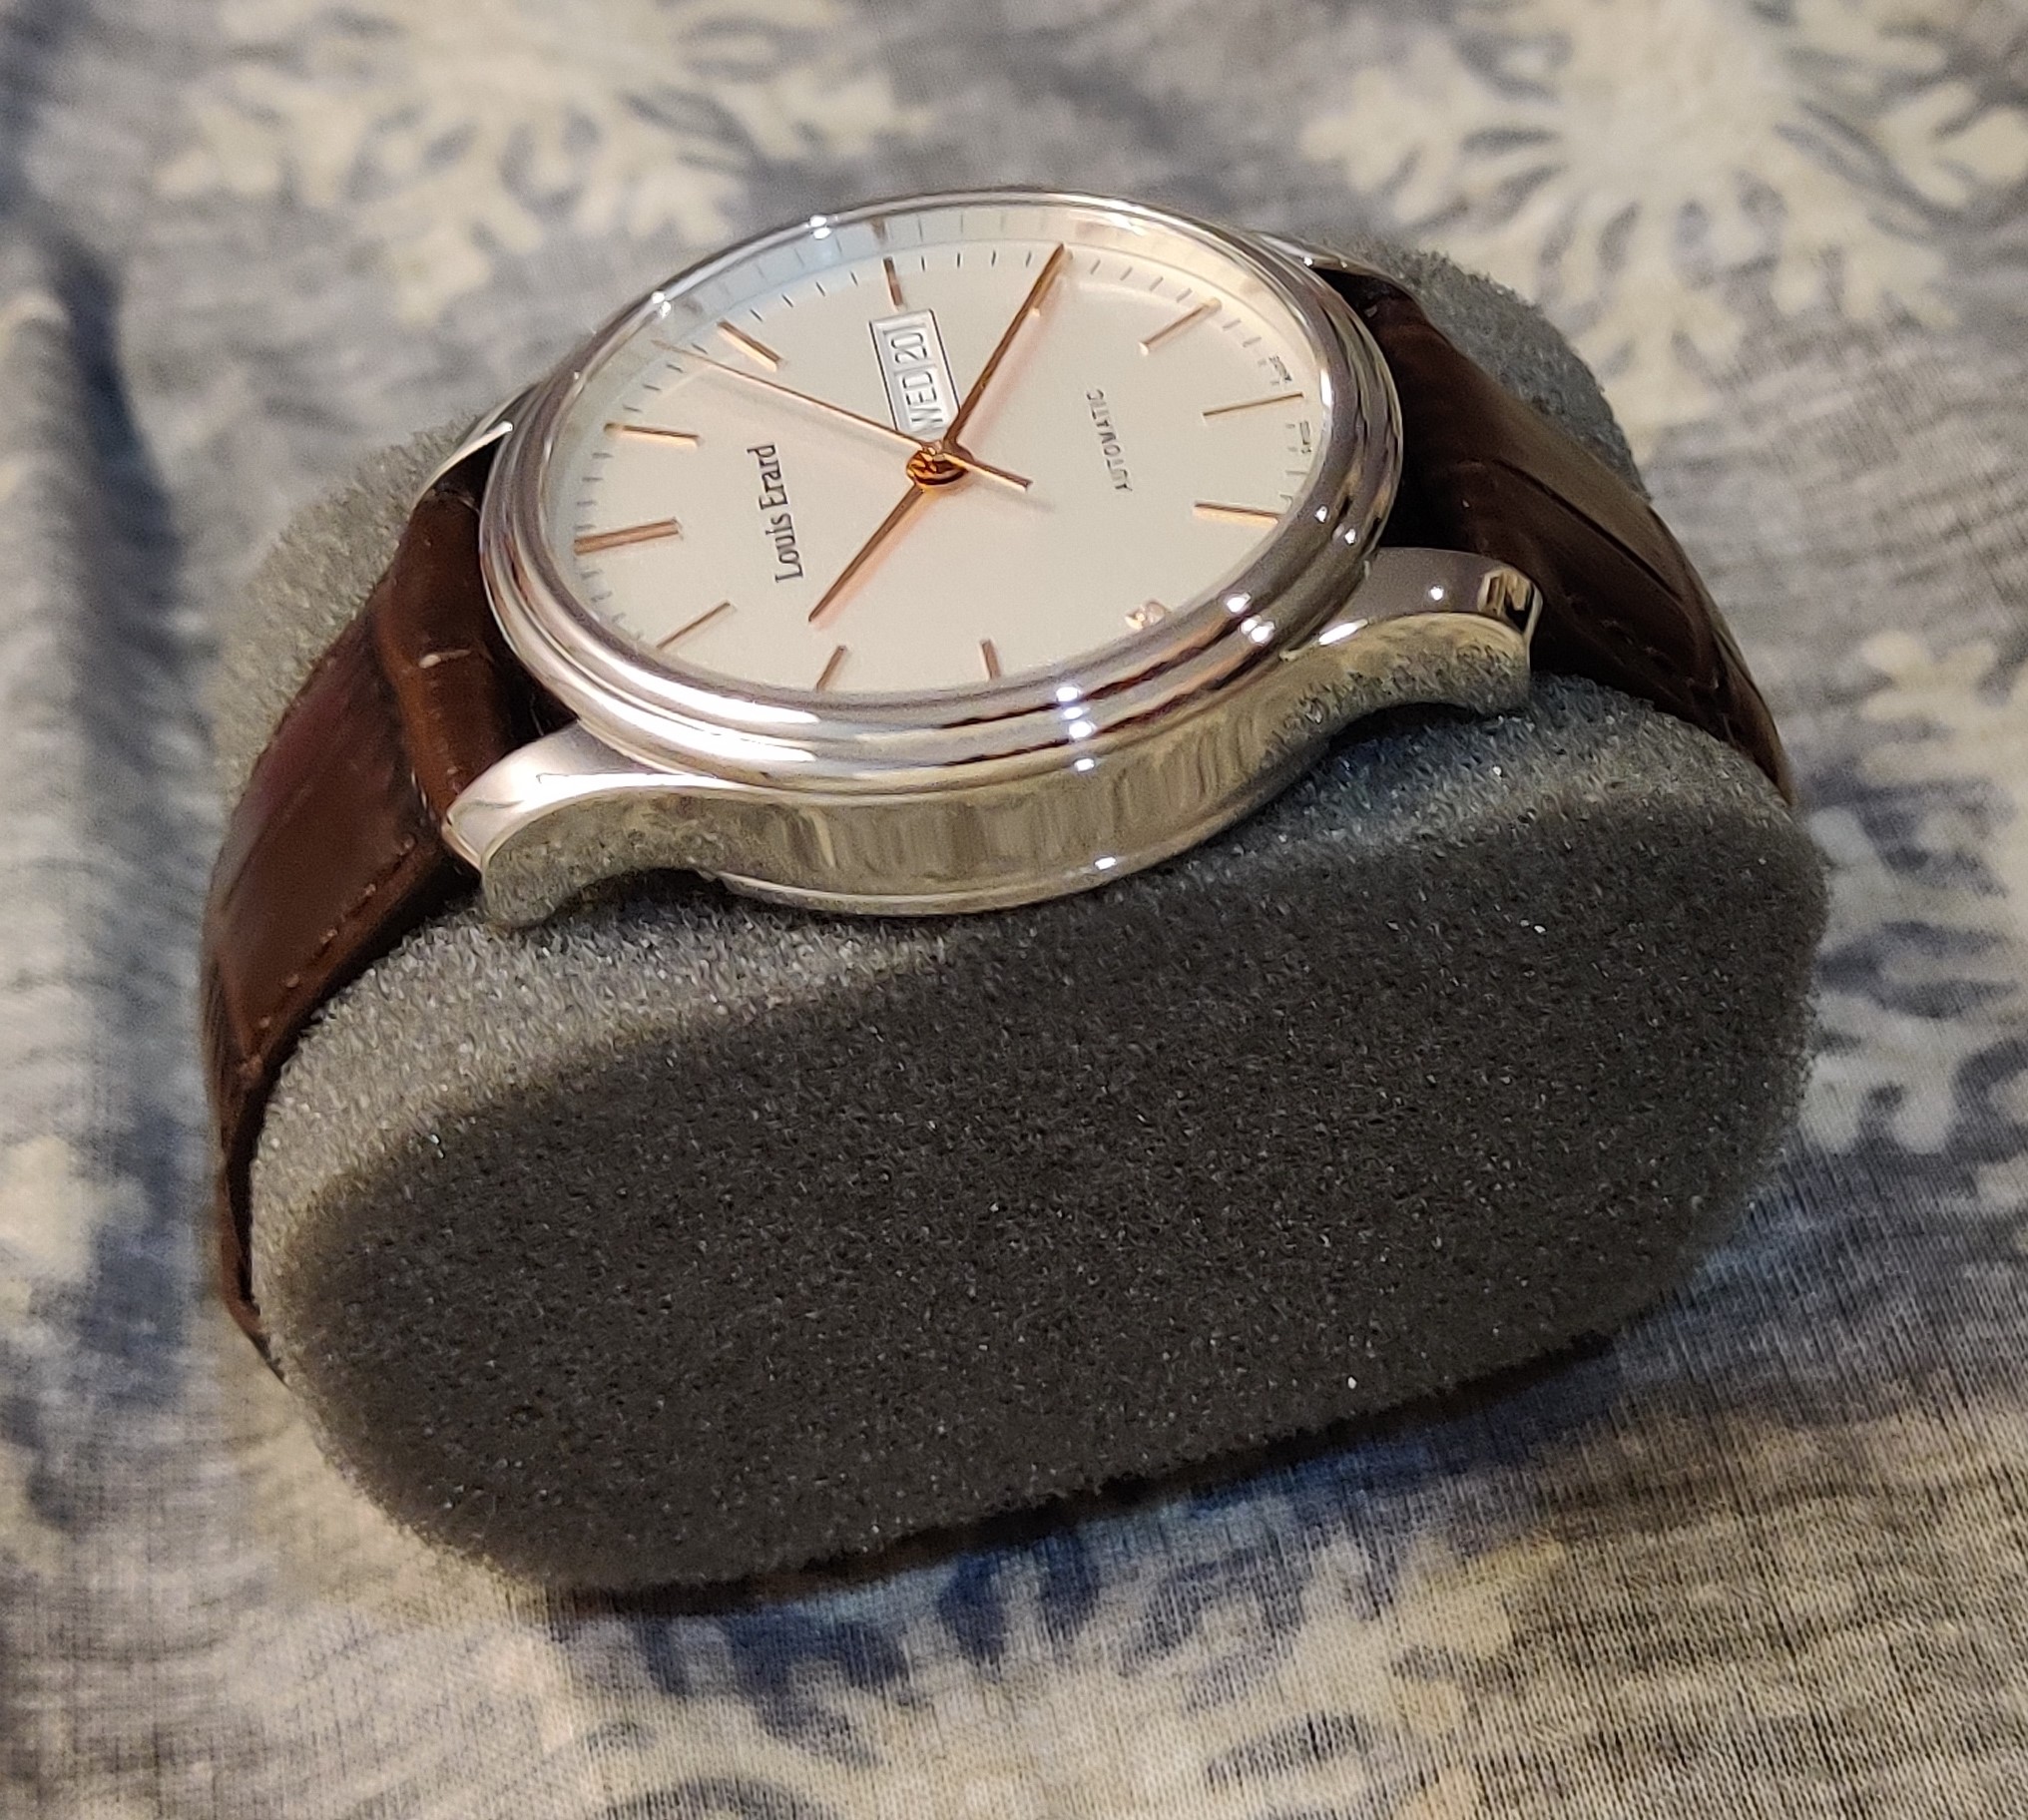 WTS] Louis Erard Heritage Automatic Day Date : r/Watchexchange